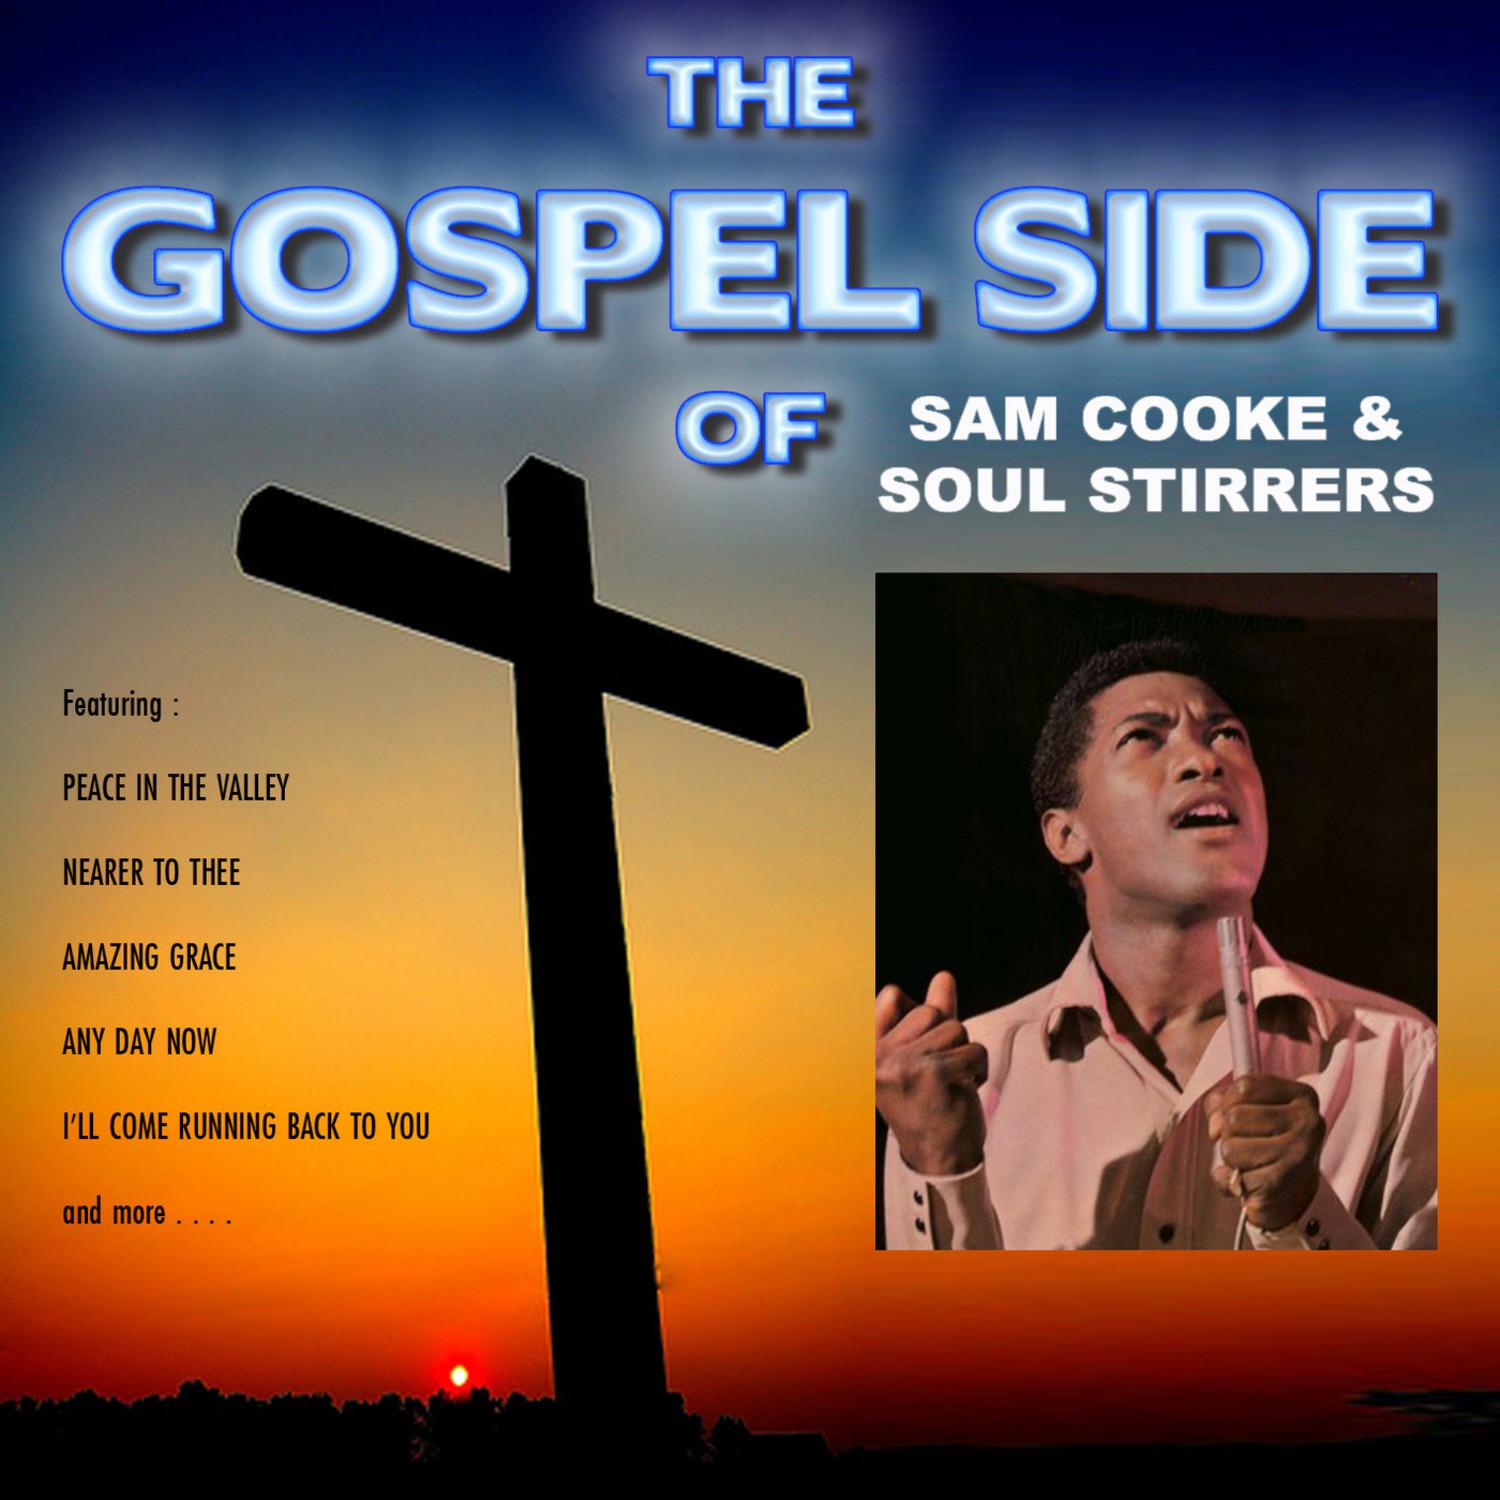 The Gospel Side of Sam Cooke and the Soul Stirrers